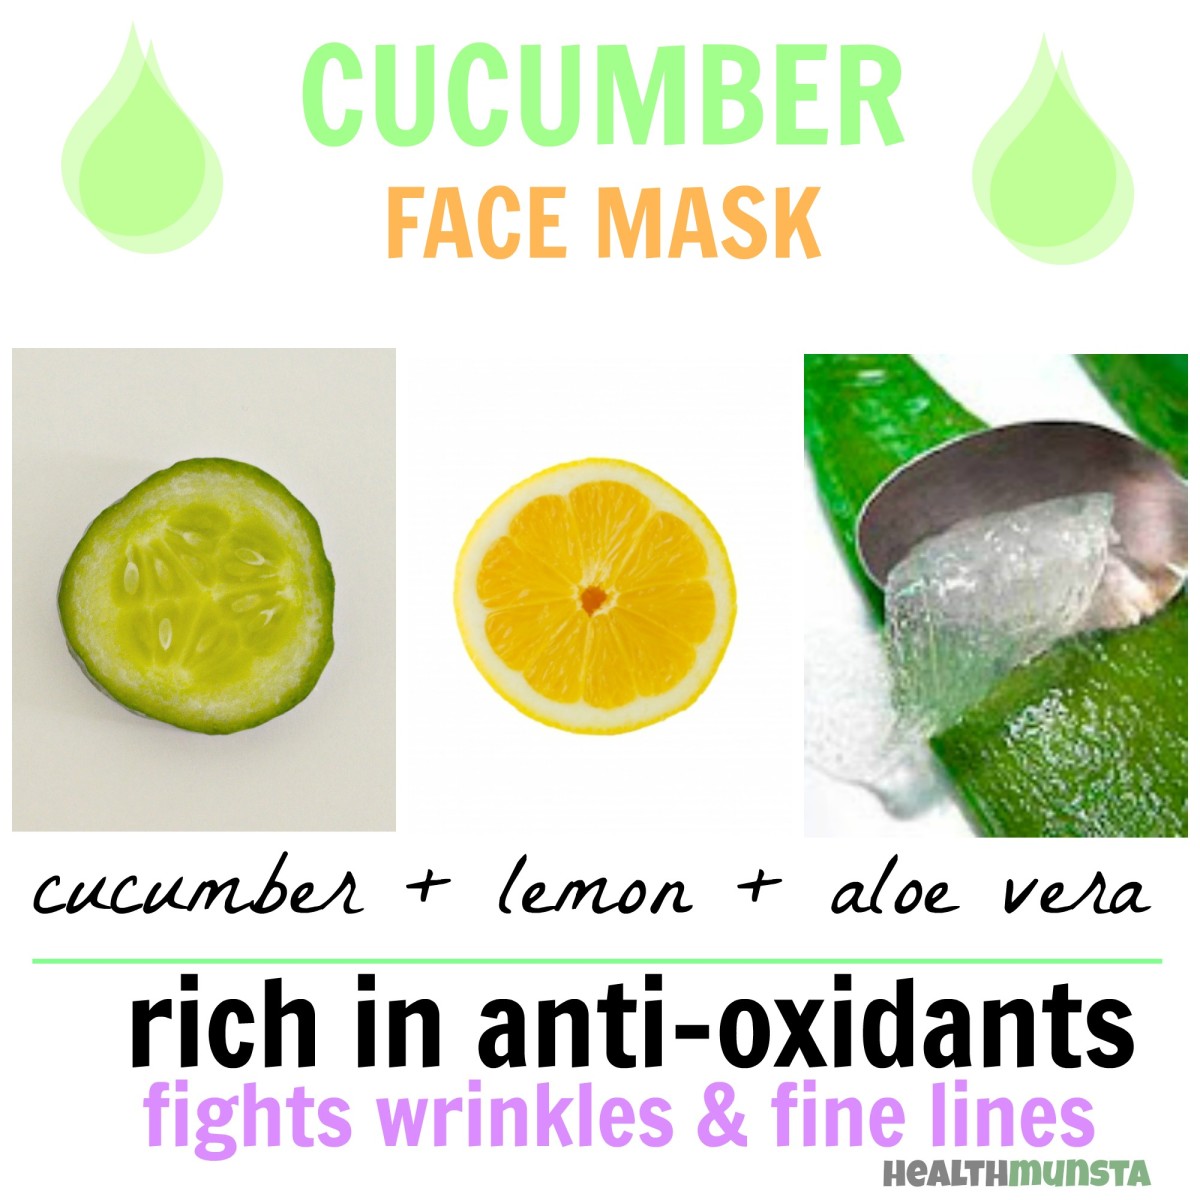 Combine aloe vera, cucumber and lemon juice to create a cooling anti-oxidant rich face mask, specially targeted for dull and aging skin.